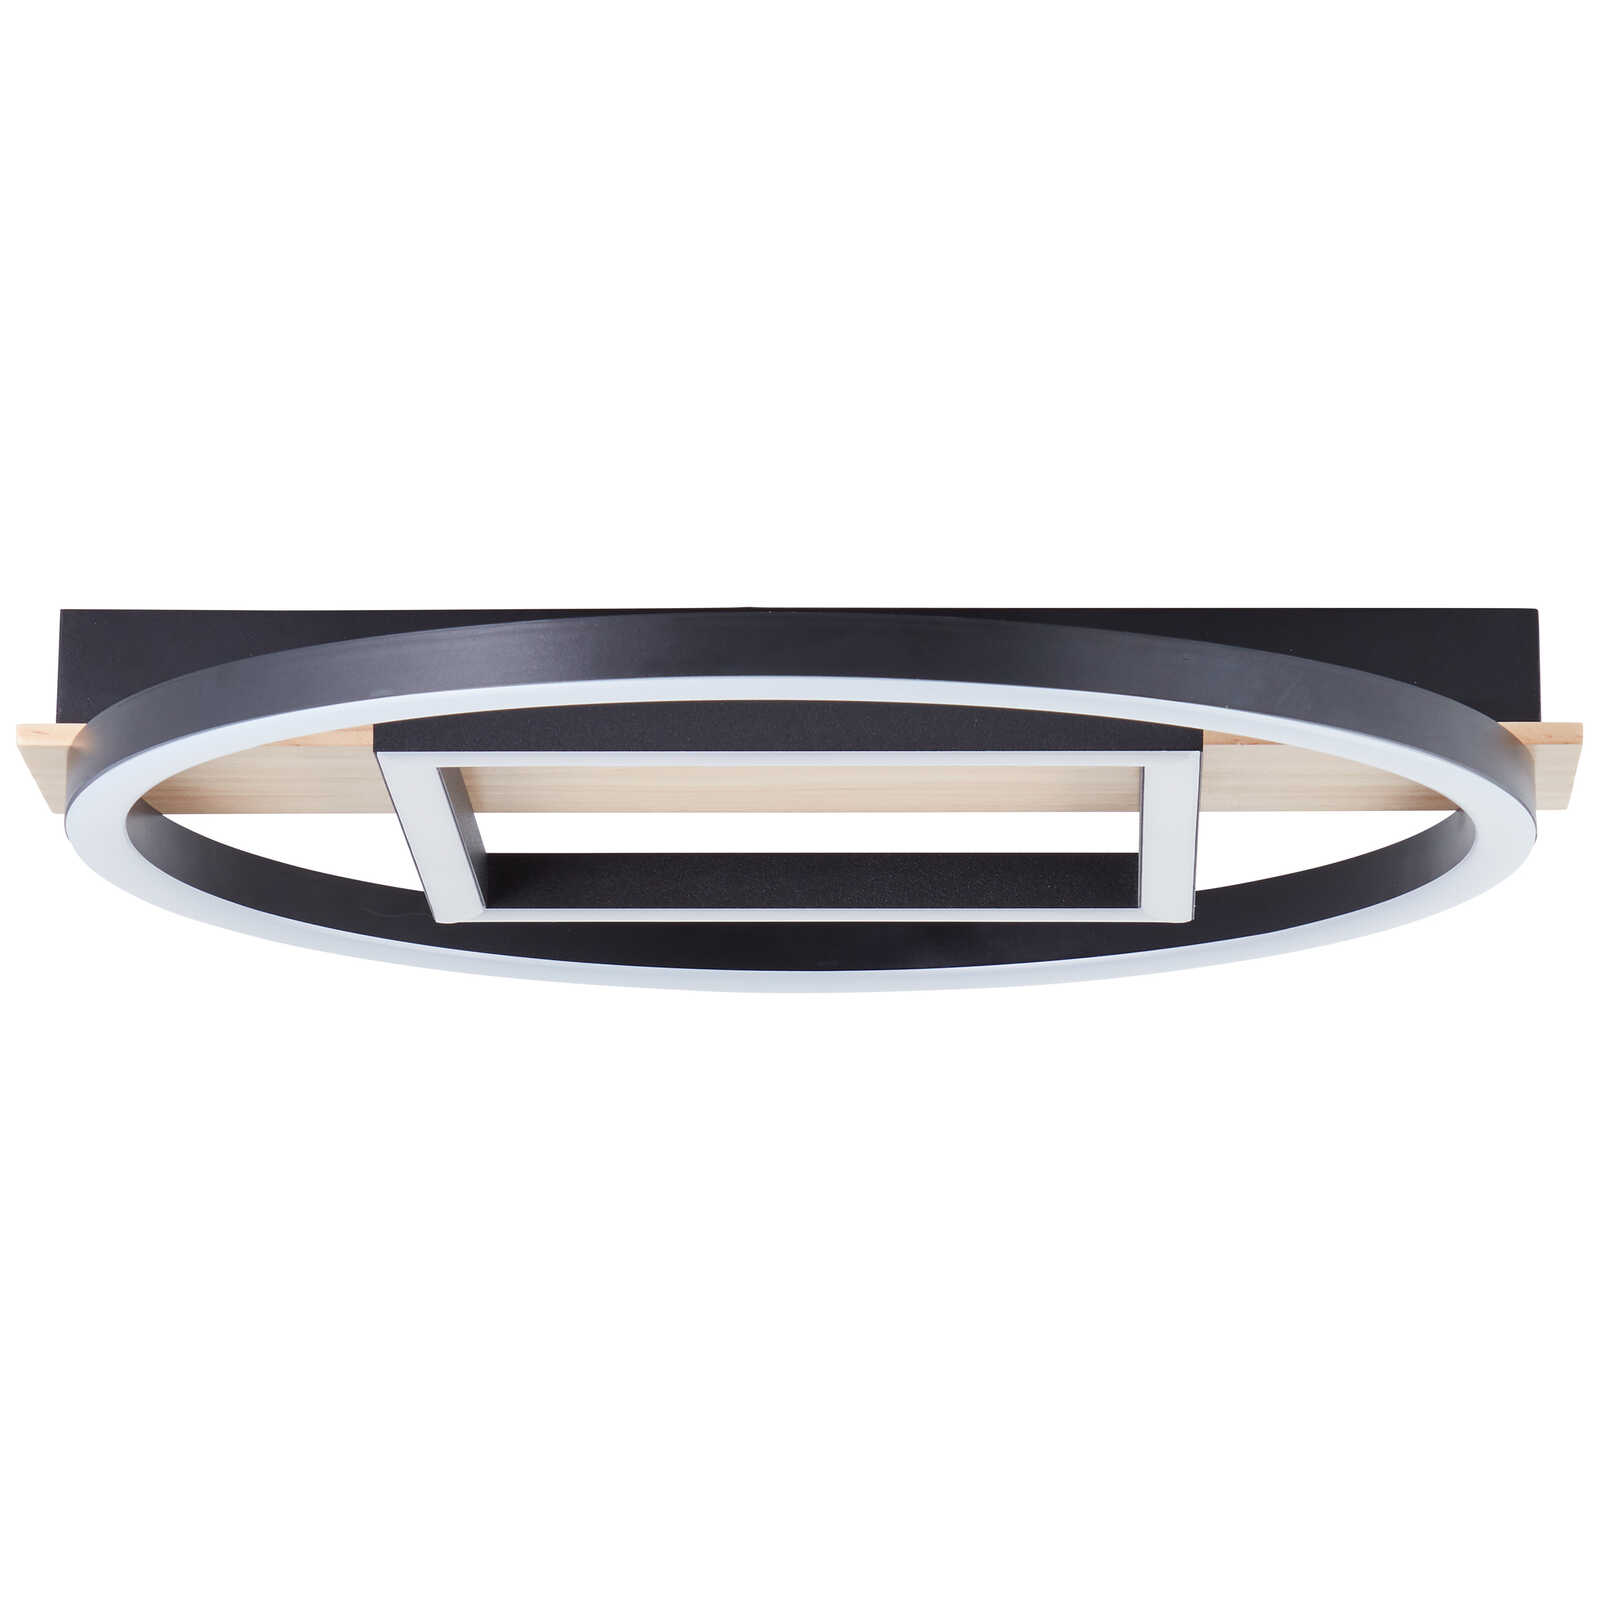             Wooden ceiling light - Leopold 3 - Brown
        